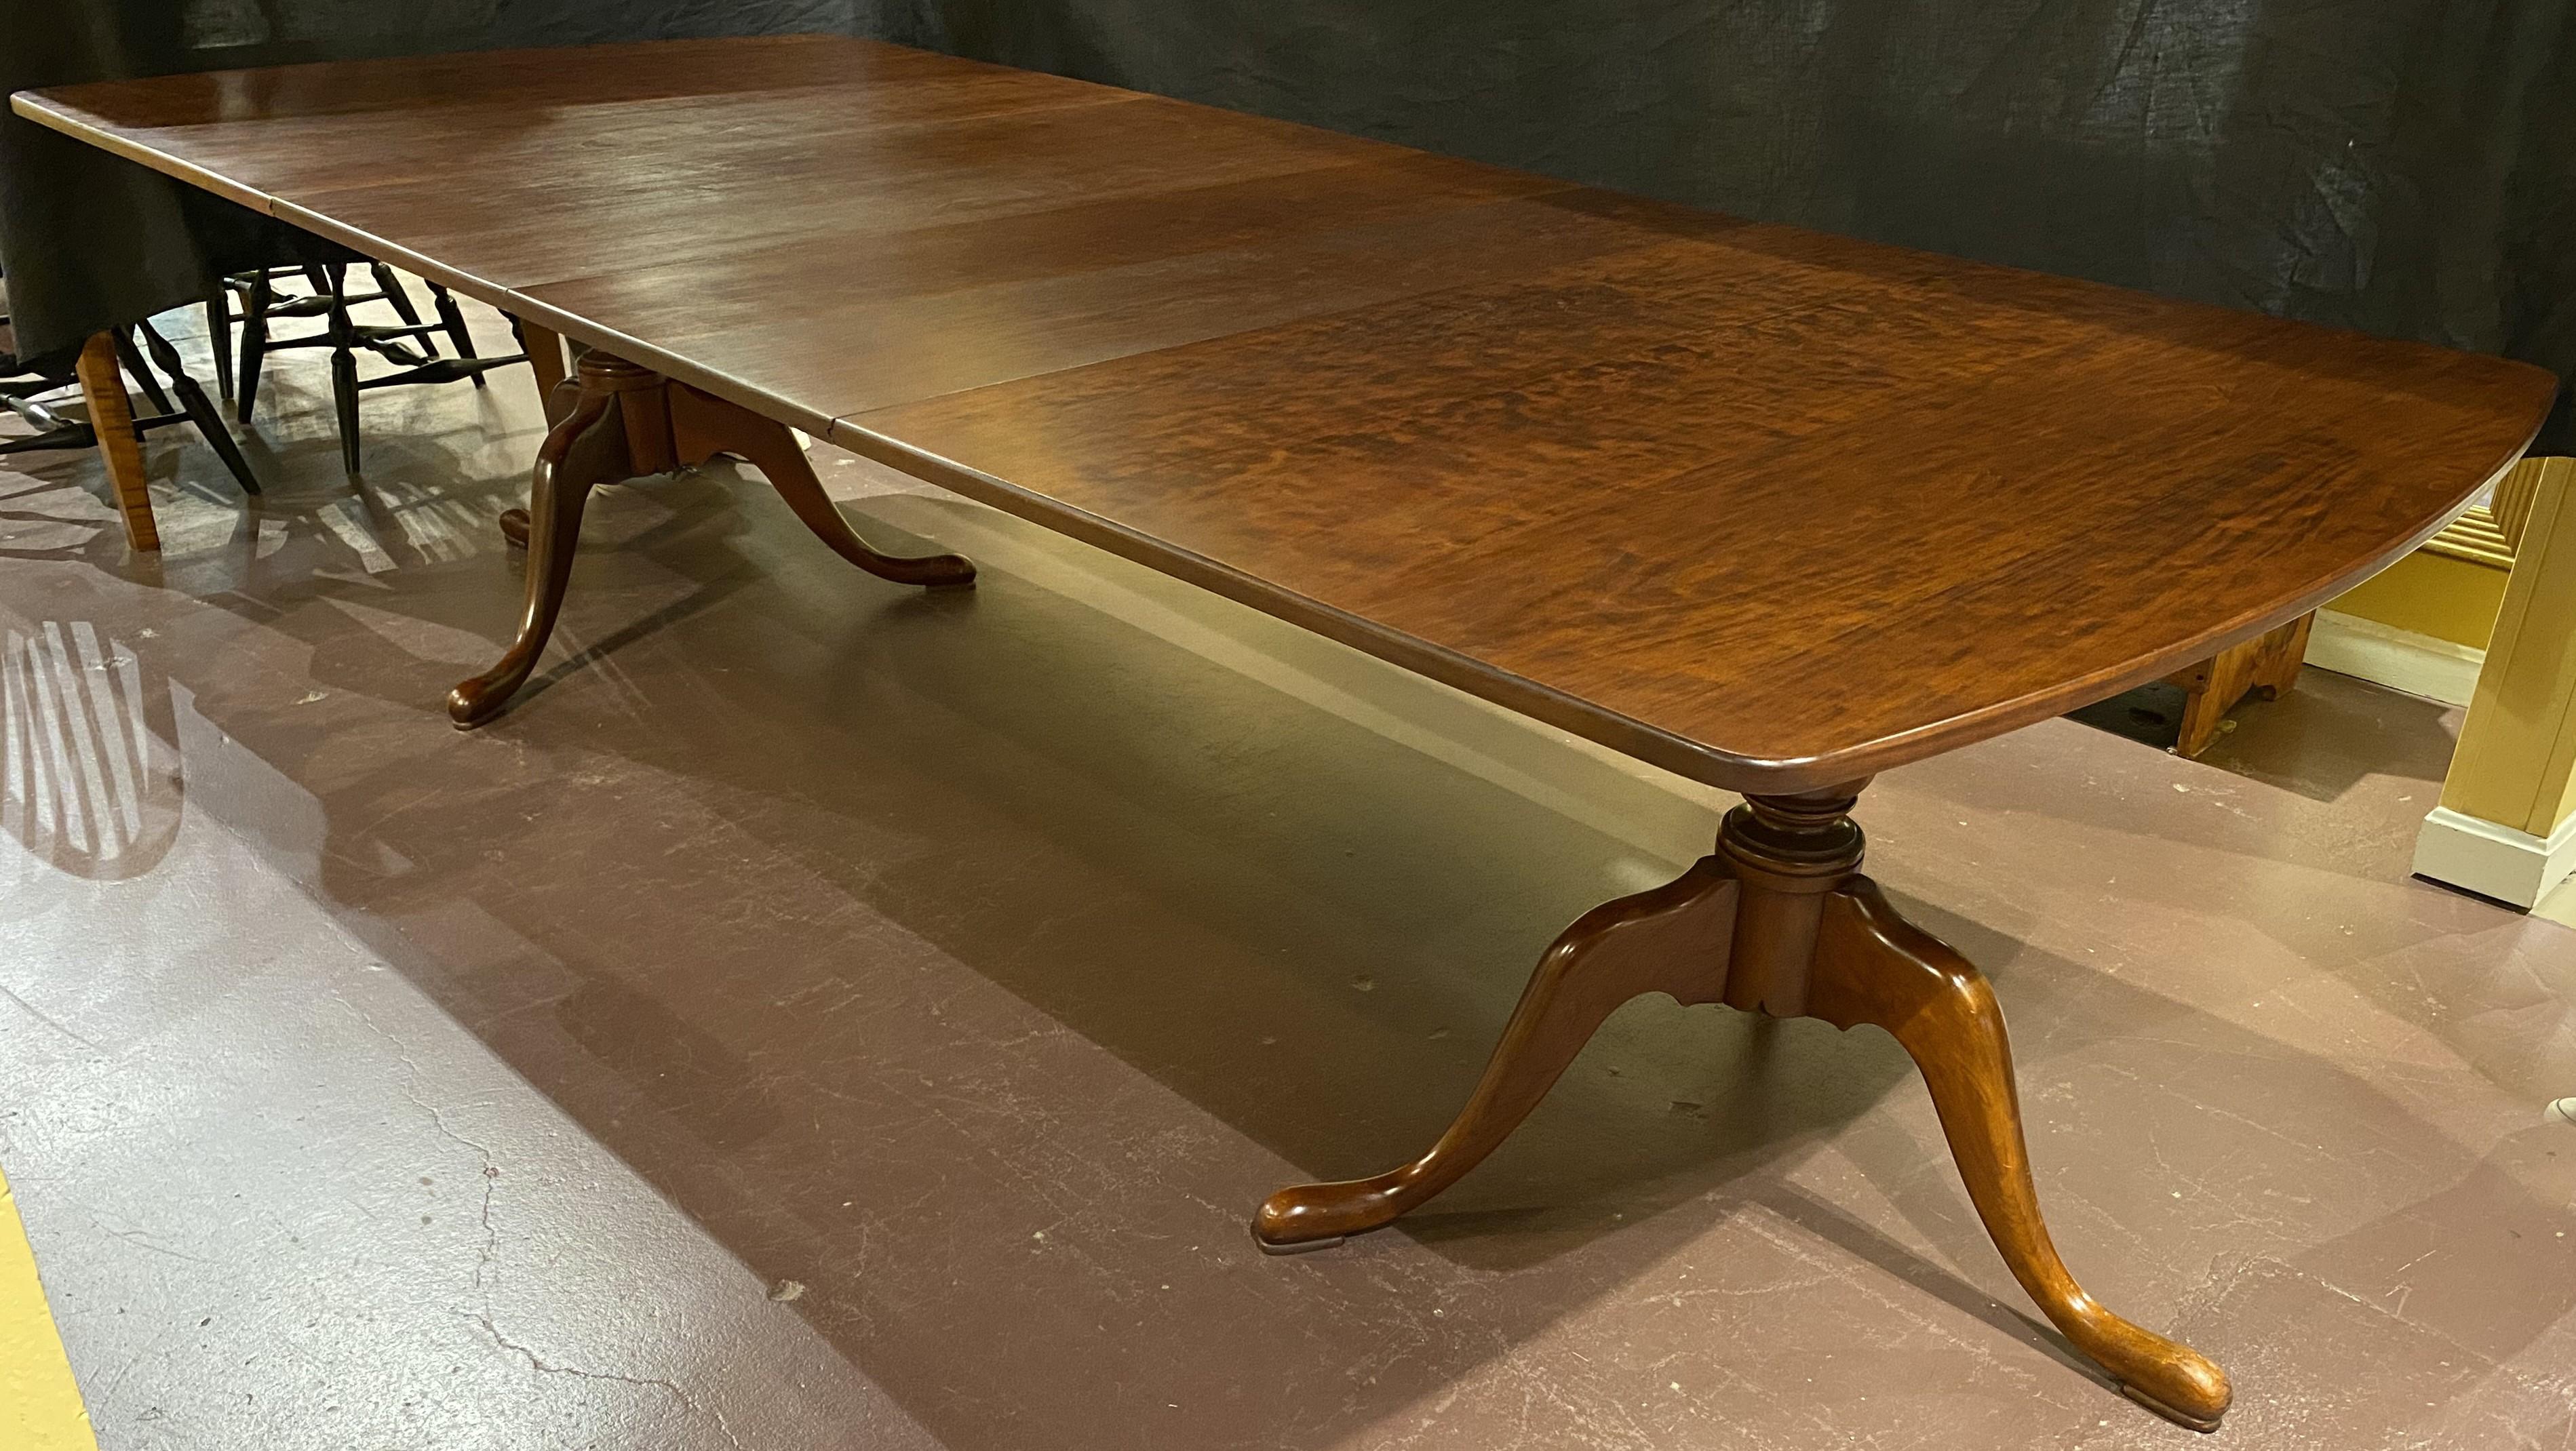 A fine Queen Anne style cherry wood double pedestal dining table, attributed to Eldred Wheeler of Hingham, MA, rectangular form with rounded ends, with two 20 inch tongue and groove finished leaves, expandable supports under the leaves, and tripod